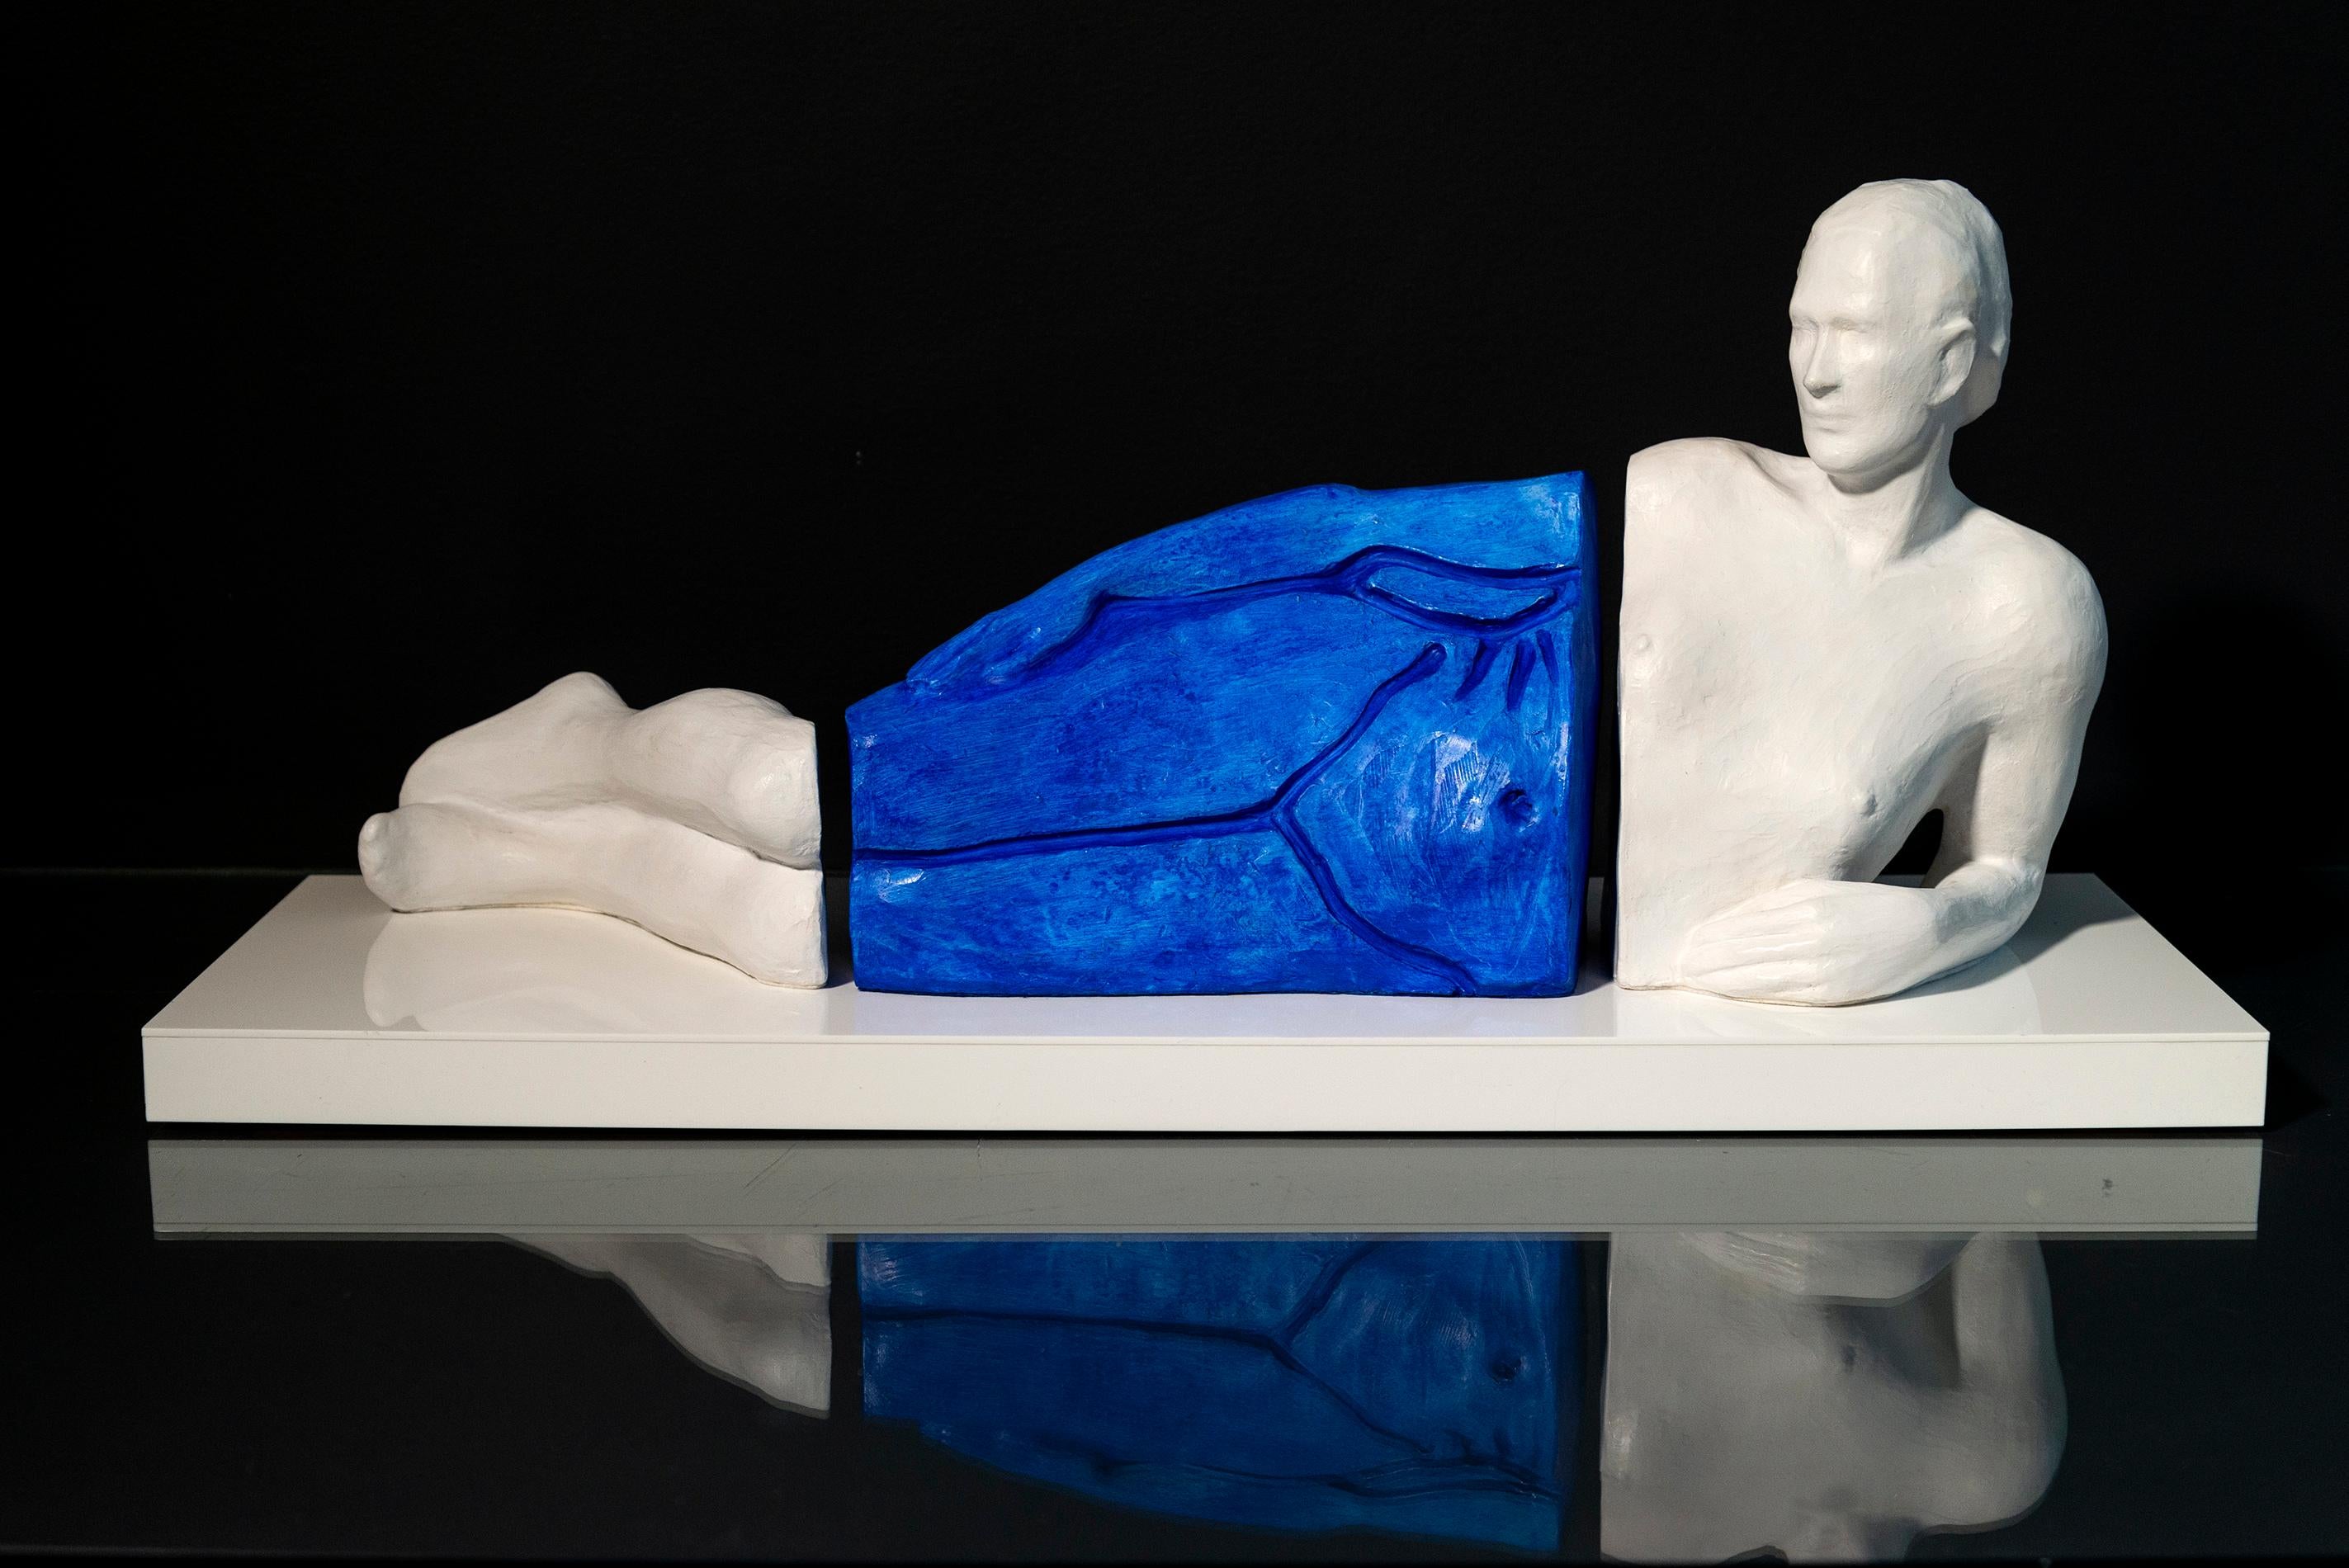 An Impression in Blue - figurative, female, polymer, gypsum, tabletop sculpture - Sculpture by Frances Semple